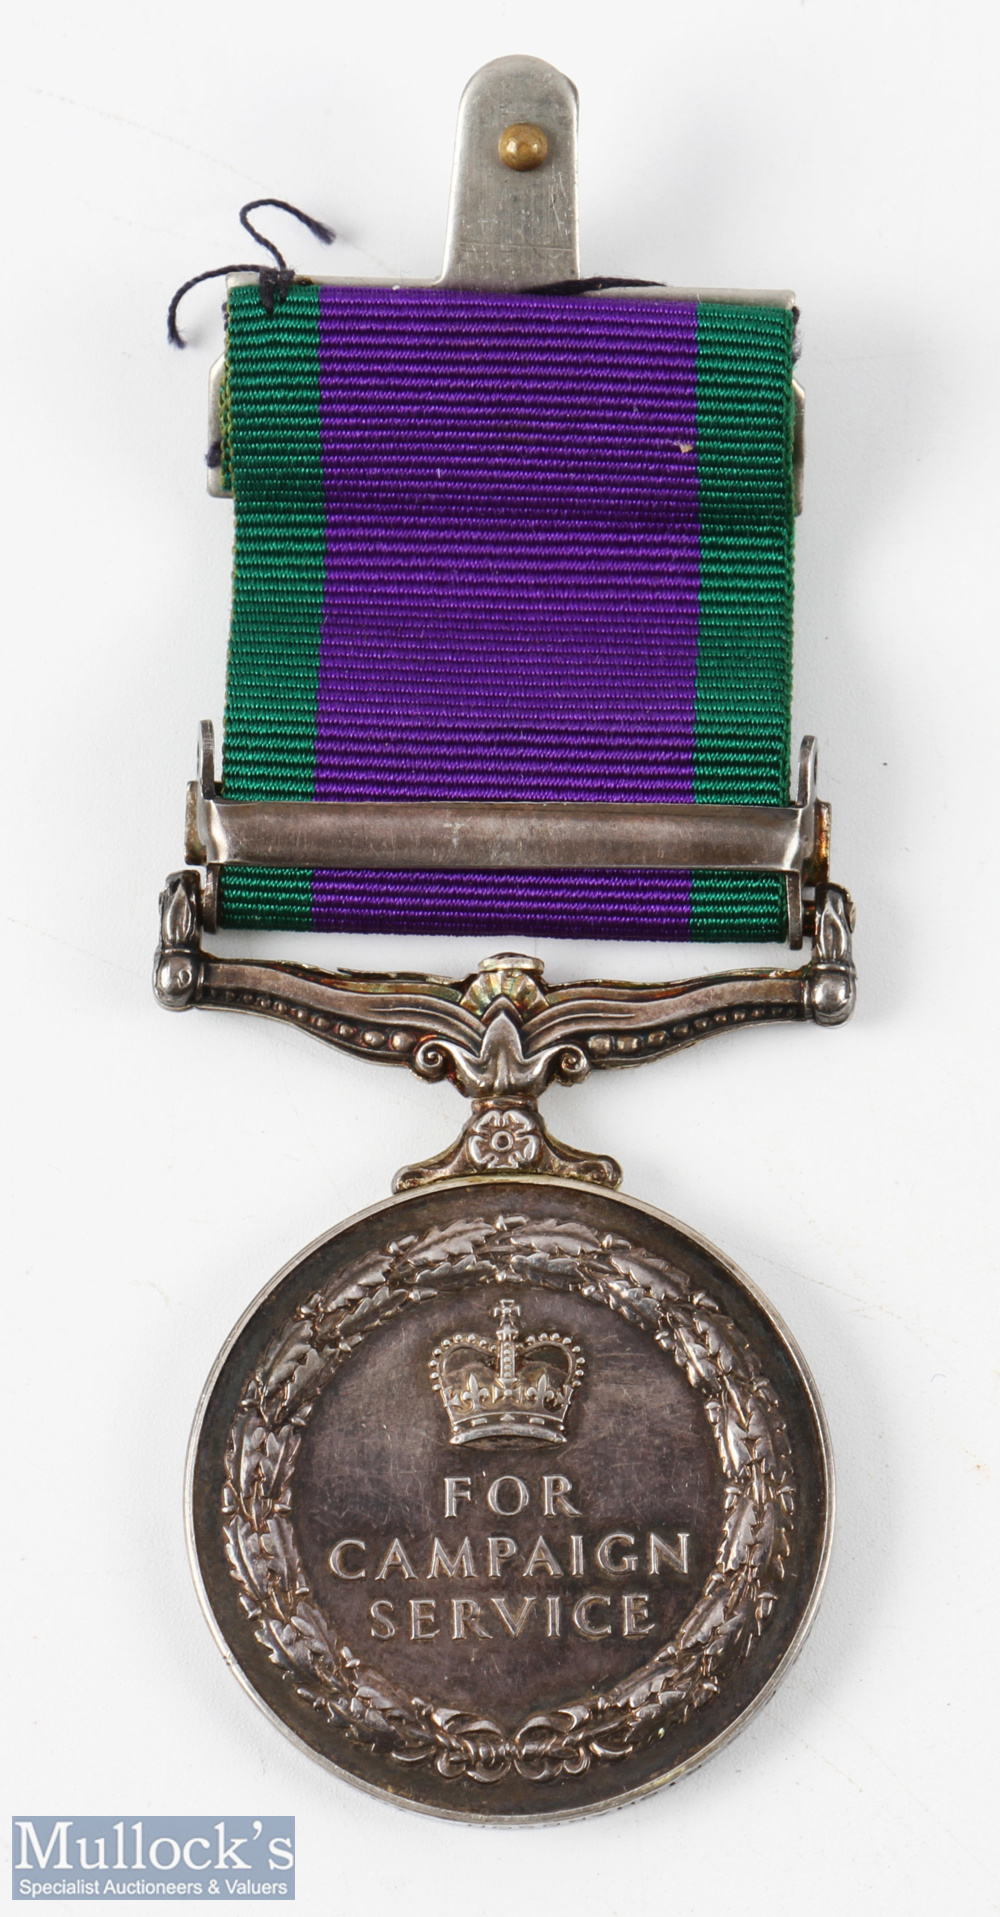 EIIR Campaign Service Medal CSM & Northern Ireland Clasp and ribbon Sac P C Richardson (H8403402) - Image 2 of 3